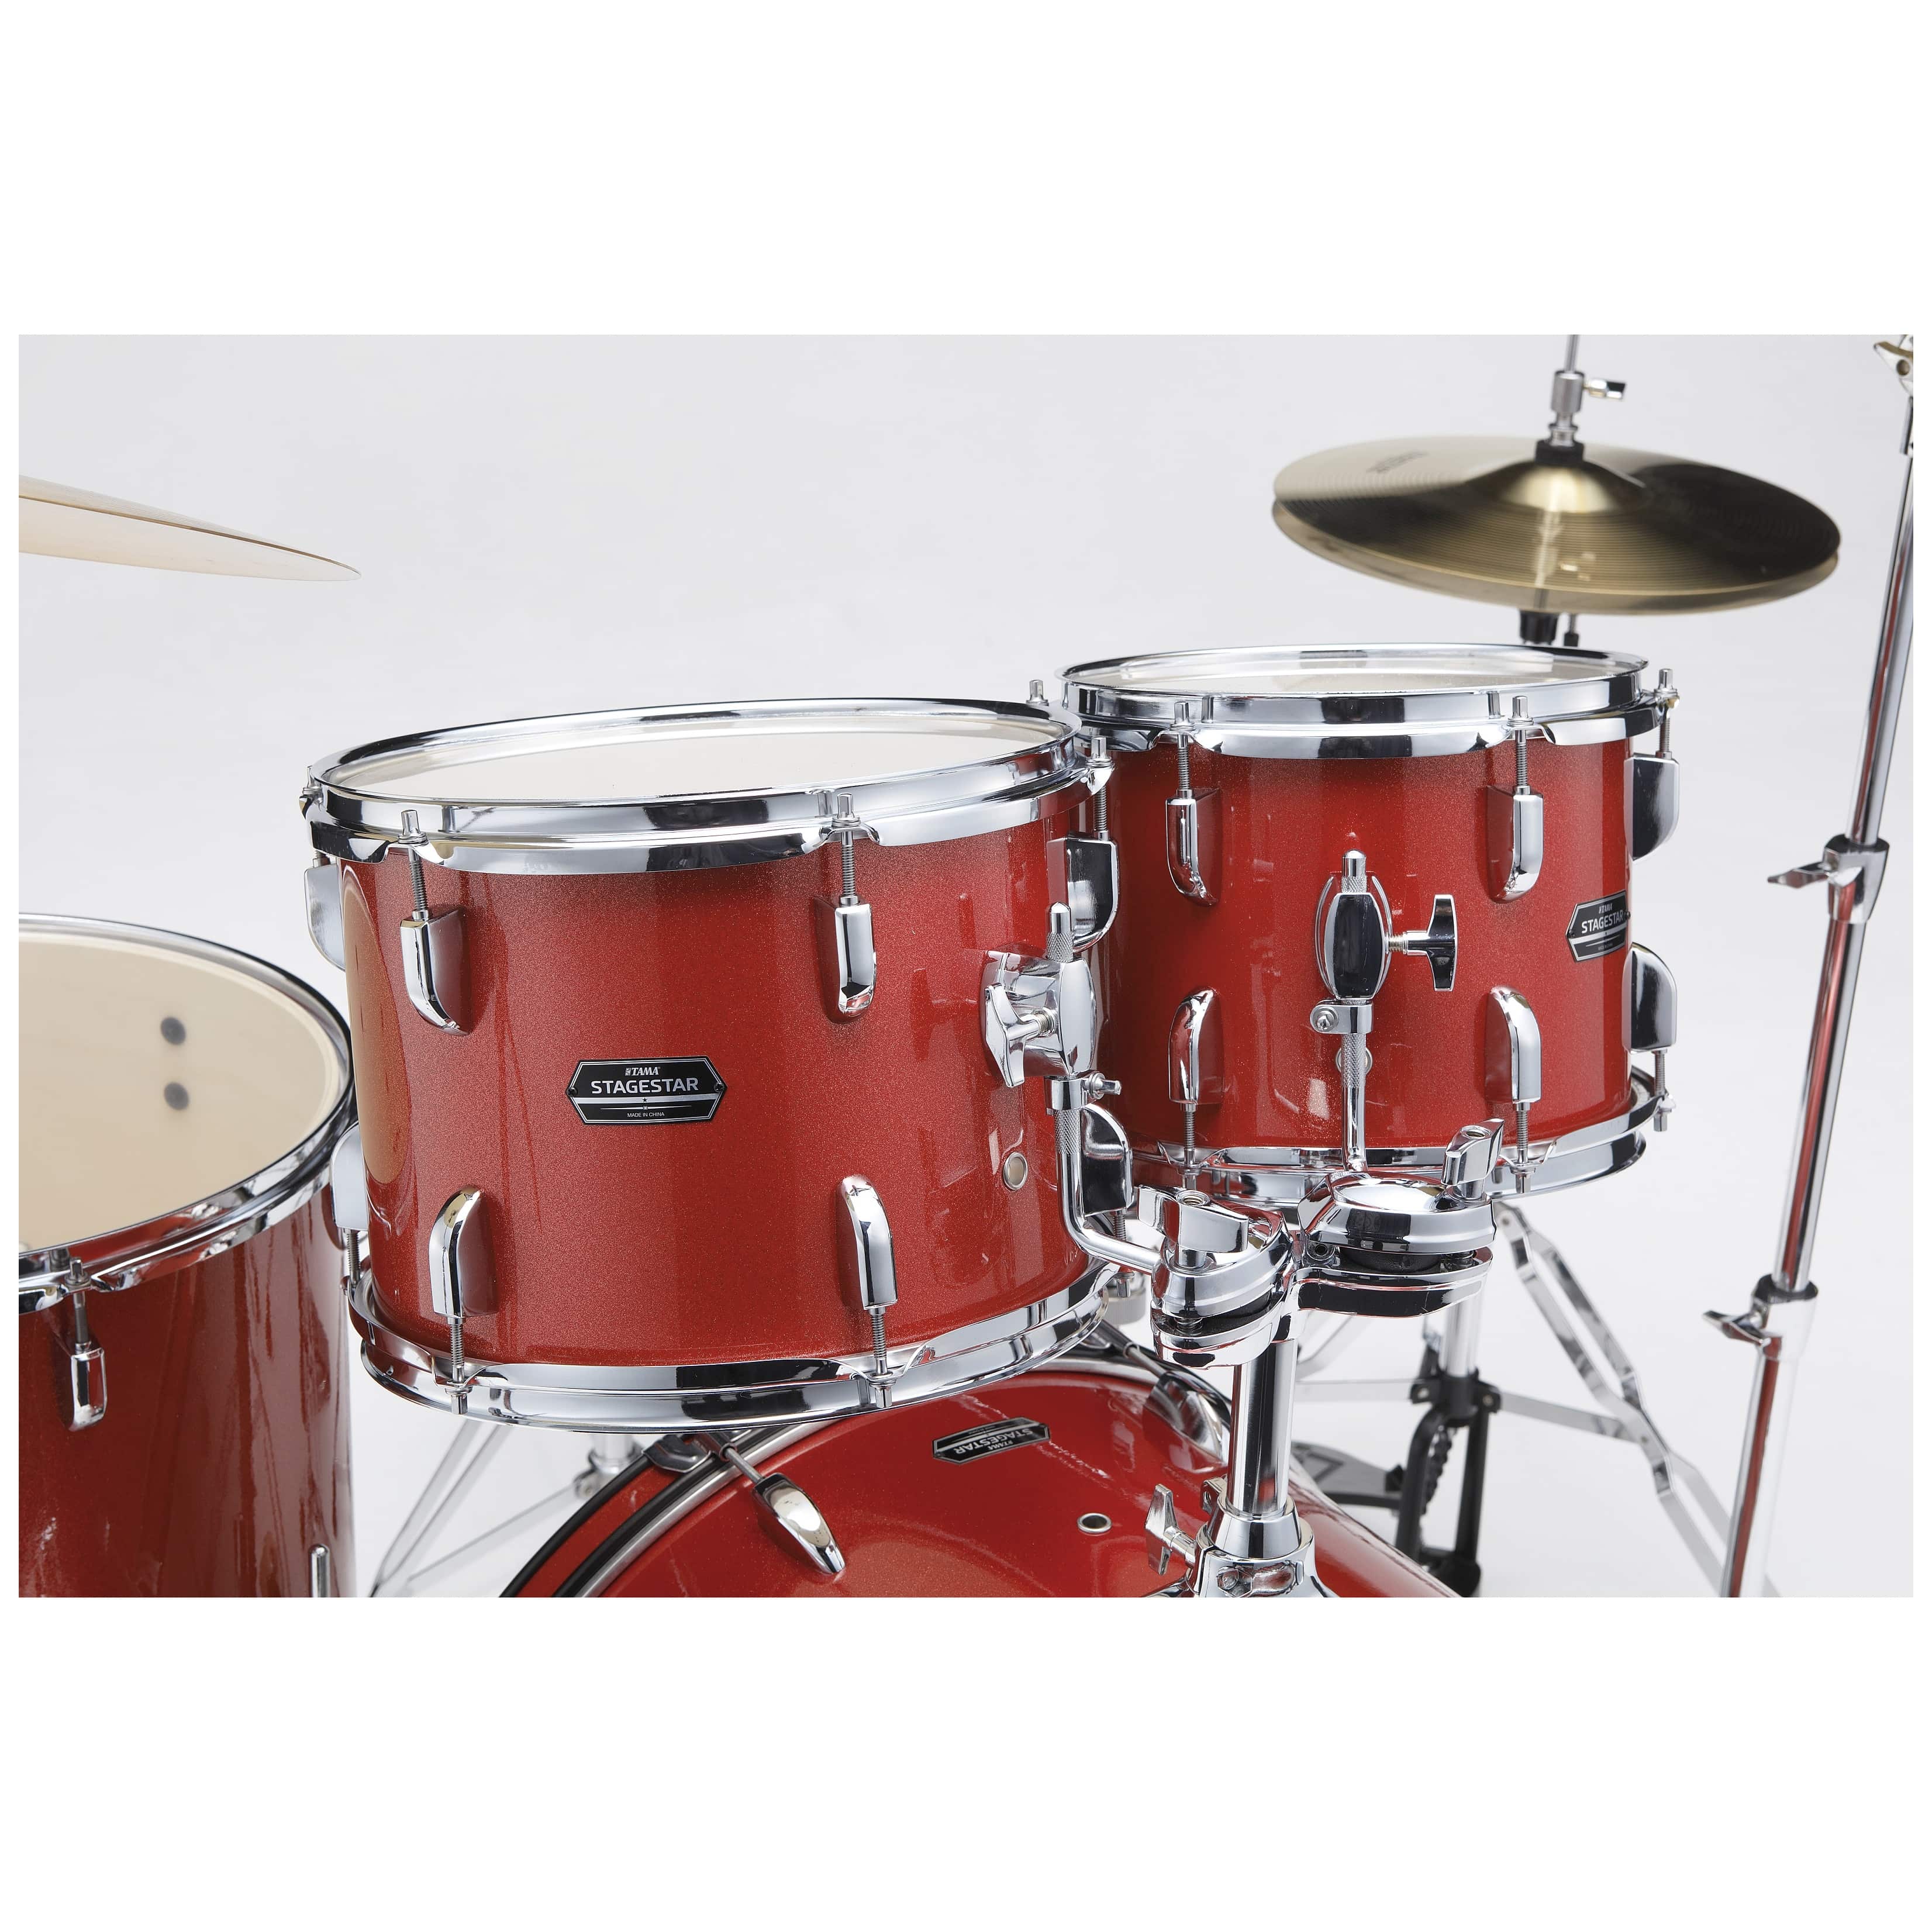 Tama ST50H5-CDS - Stagestar 5-tlg. Drumset m. 20" BD - Candy Red Sparkle 1